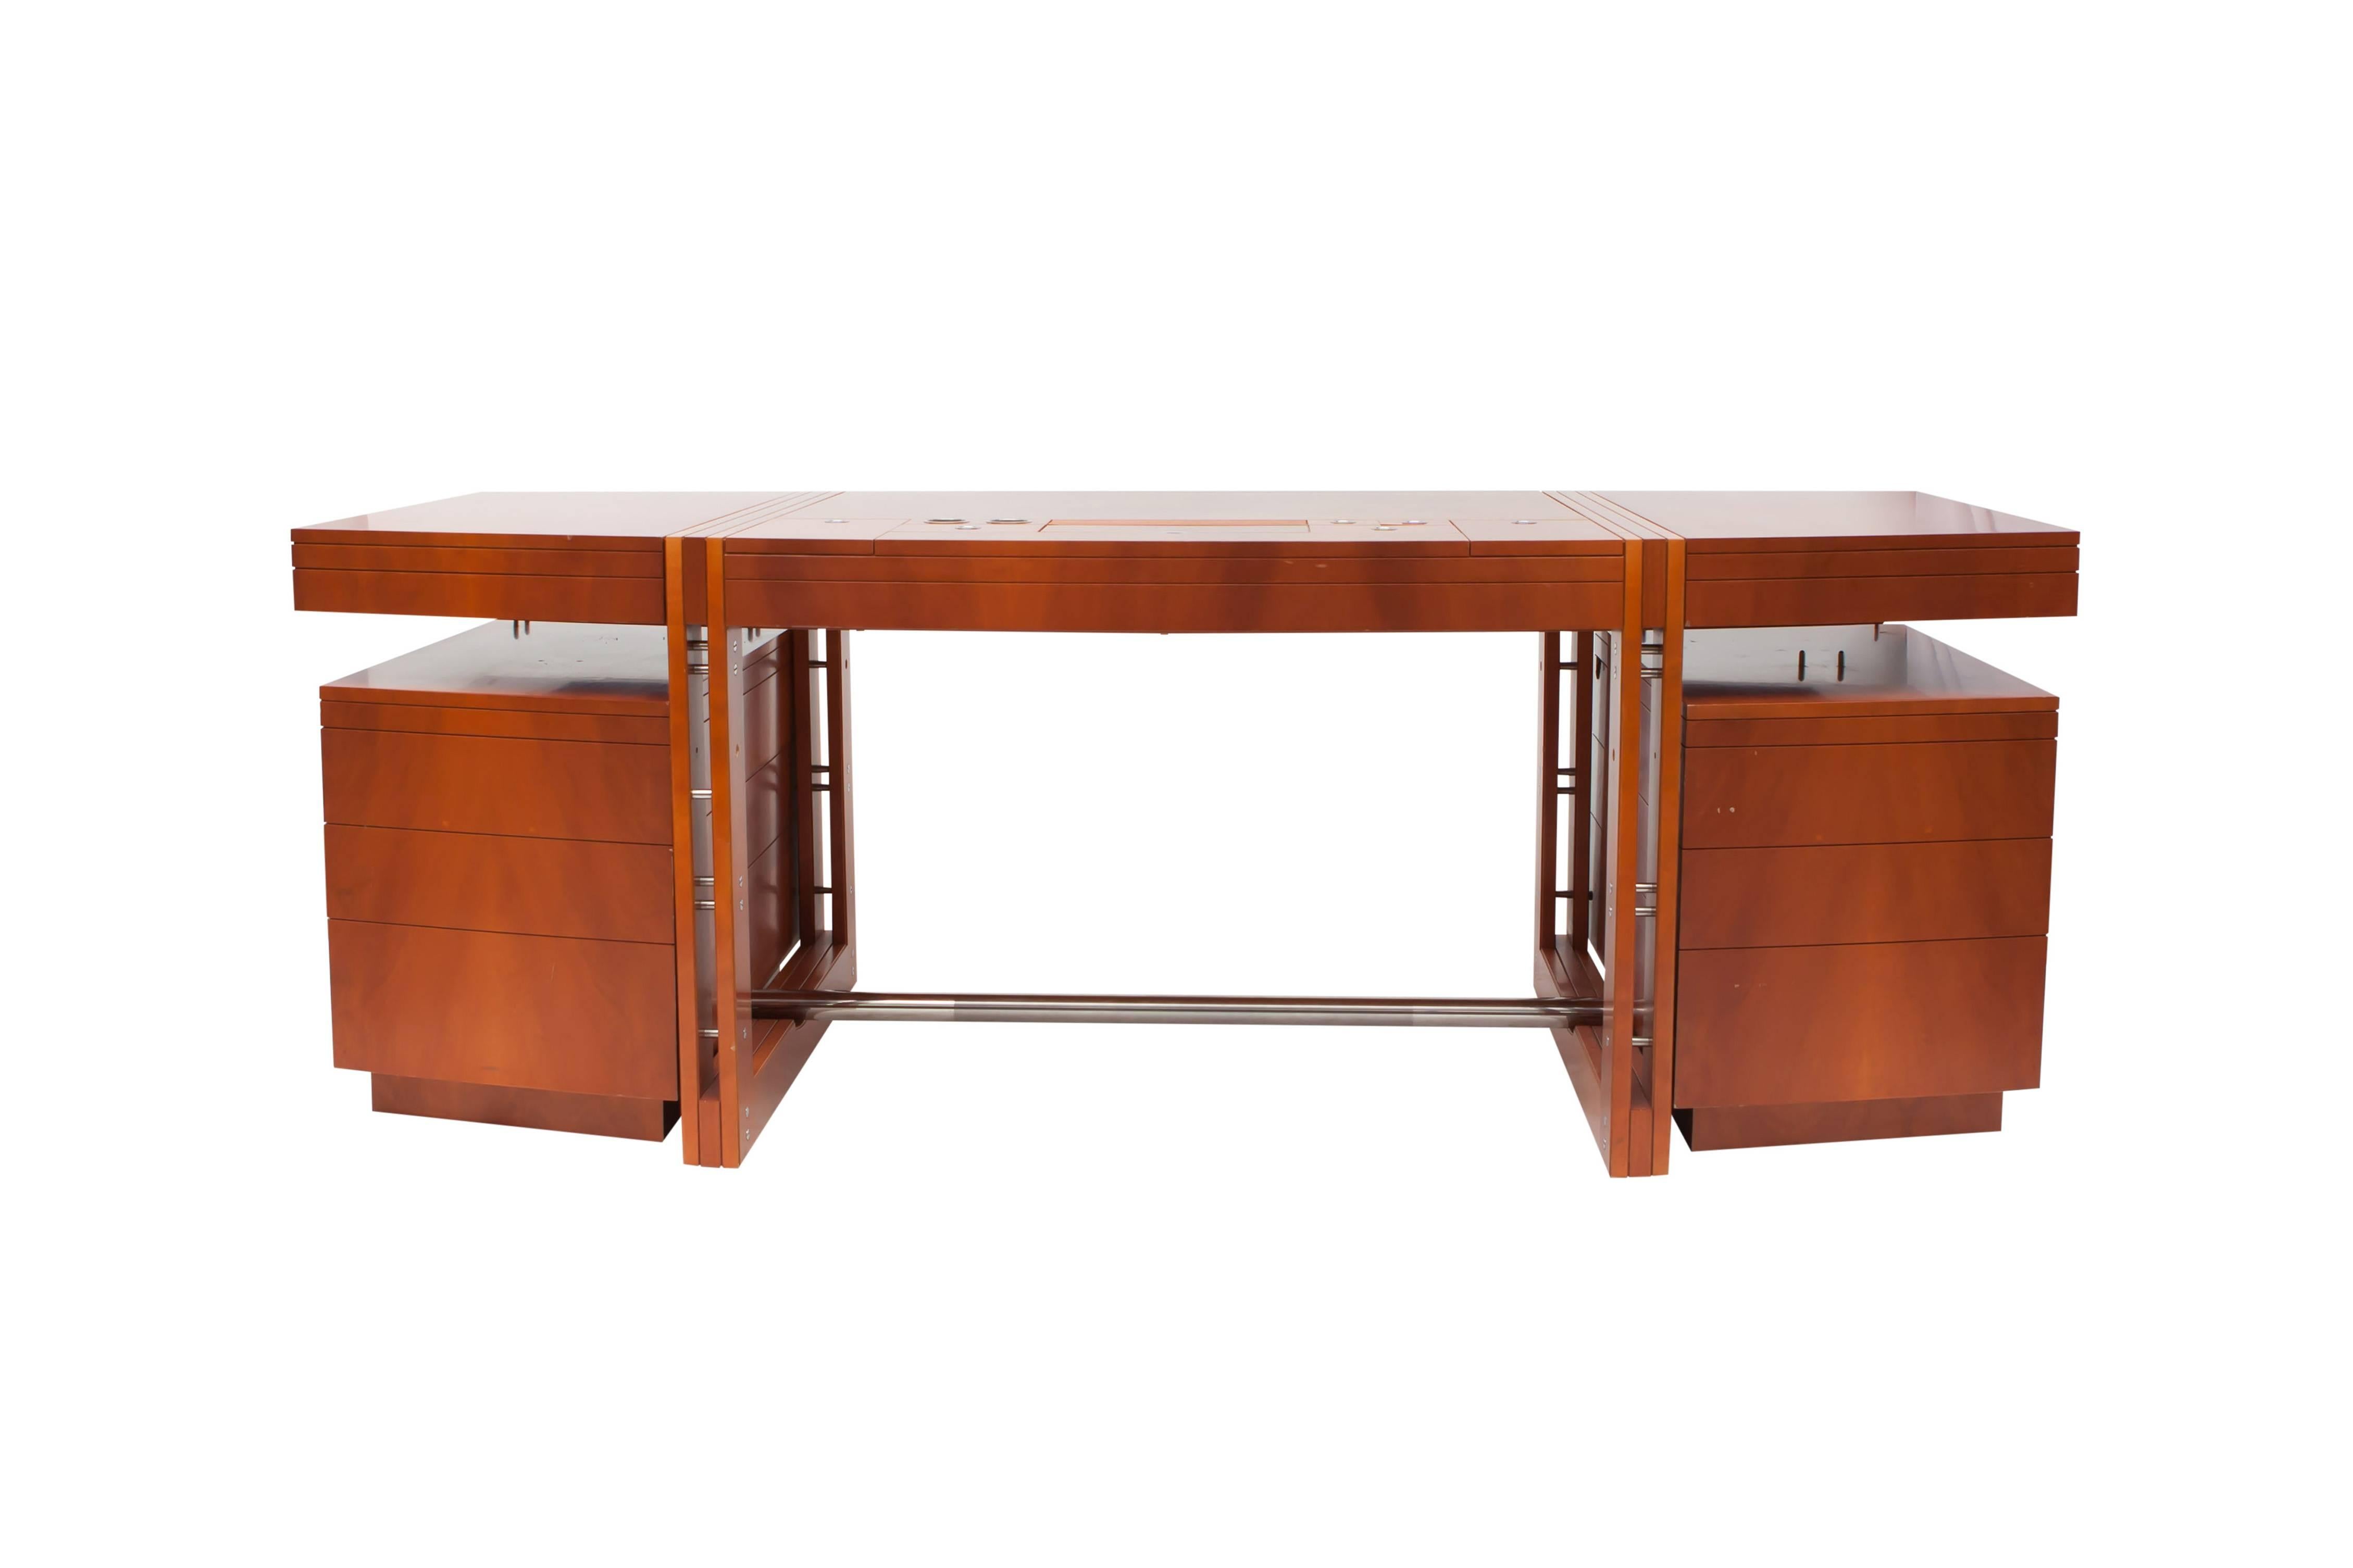 Post-modern High-end desk of the Tresserra collection.
It’s one of the most emblematic pieces of the collection, designed in 1988. 

This is an original model of the target desk.
Measures: L 210 cm x D 85 cm x H 74 cm.

Dark walnut wood. Tip-up